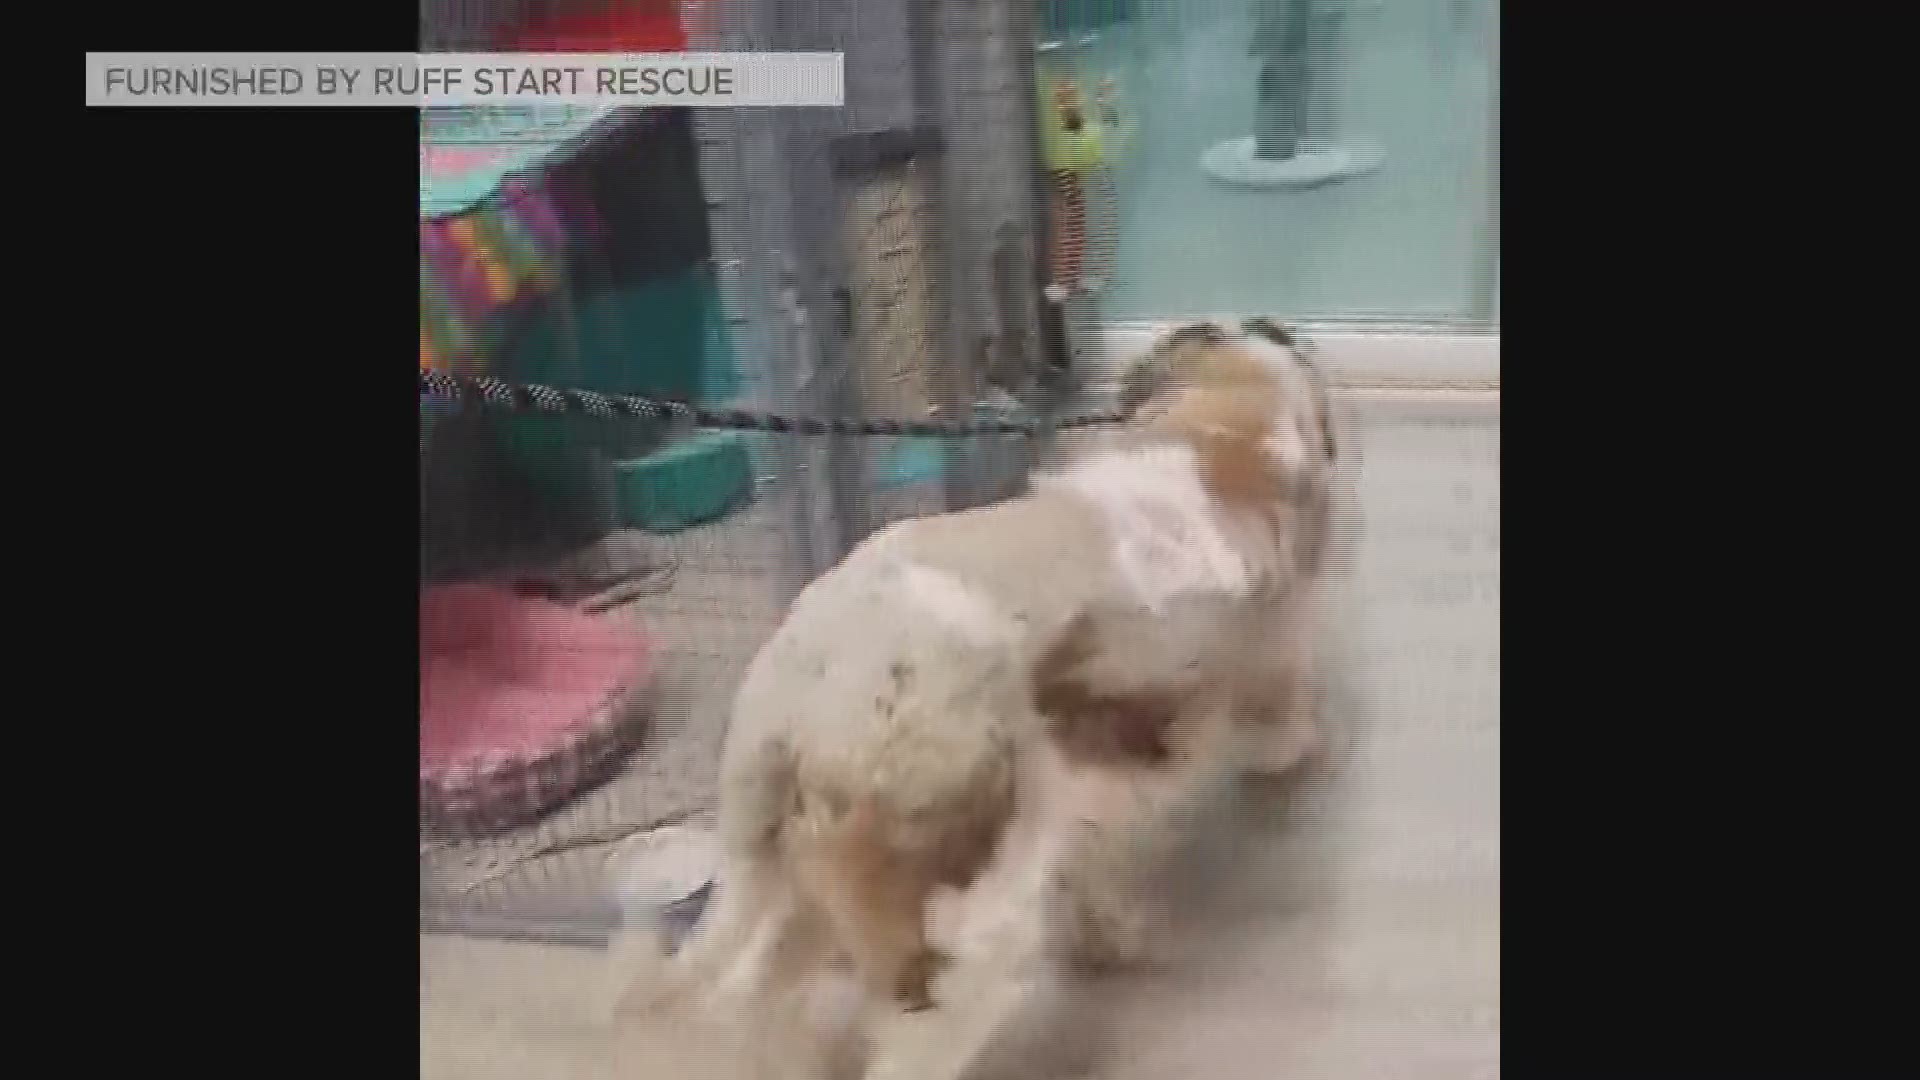 After 17 days in the cold, things are looking up for Old Lady the St. Bernard. (Video furnished by Ruff Start Rescue) https://kare11.tv/2Rd8gvn